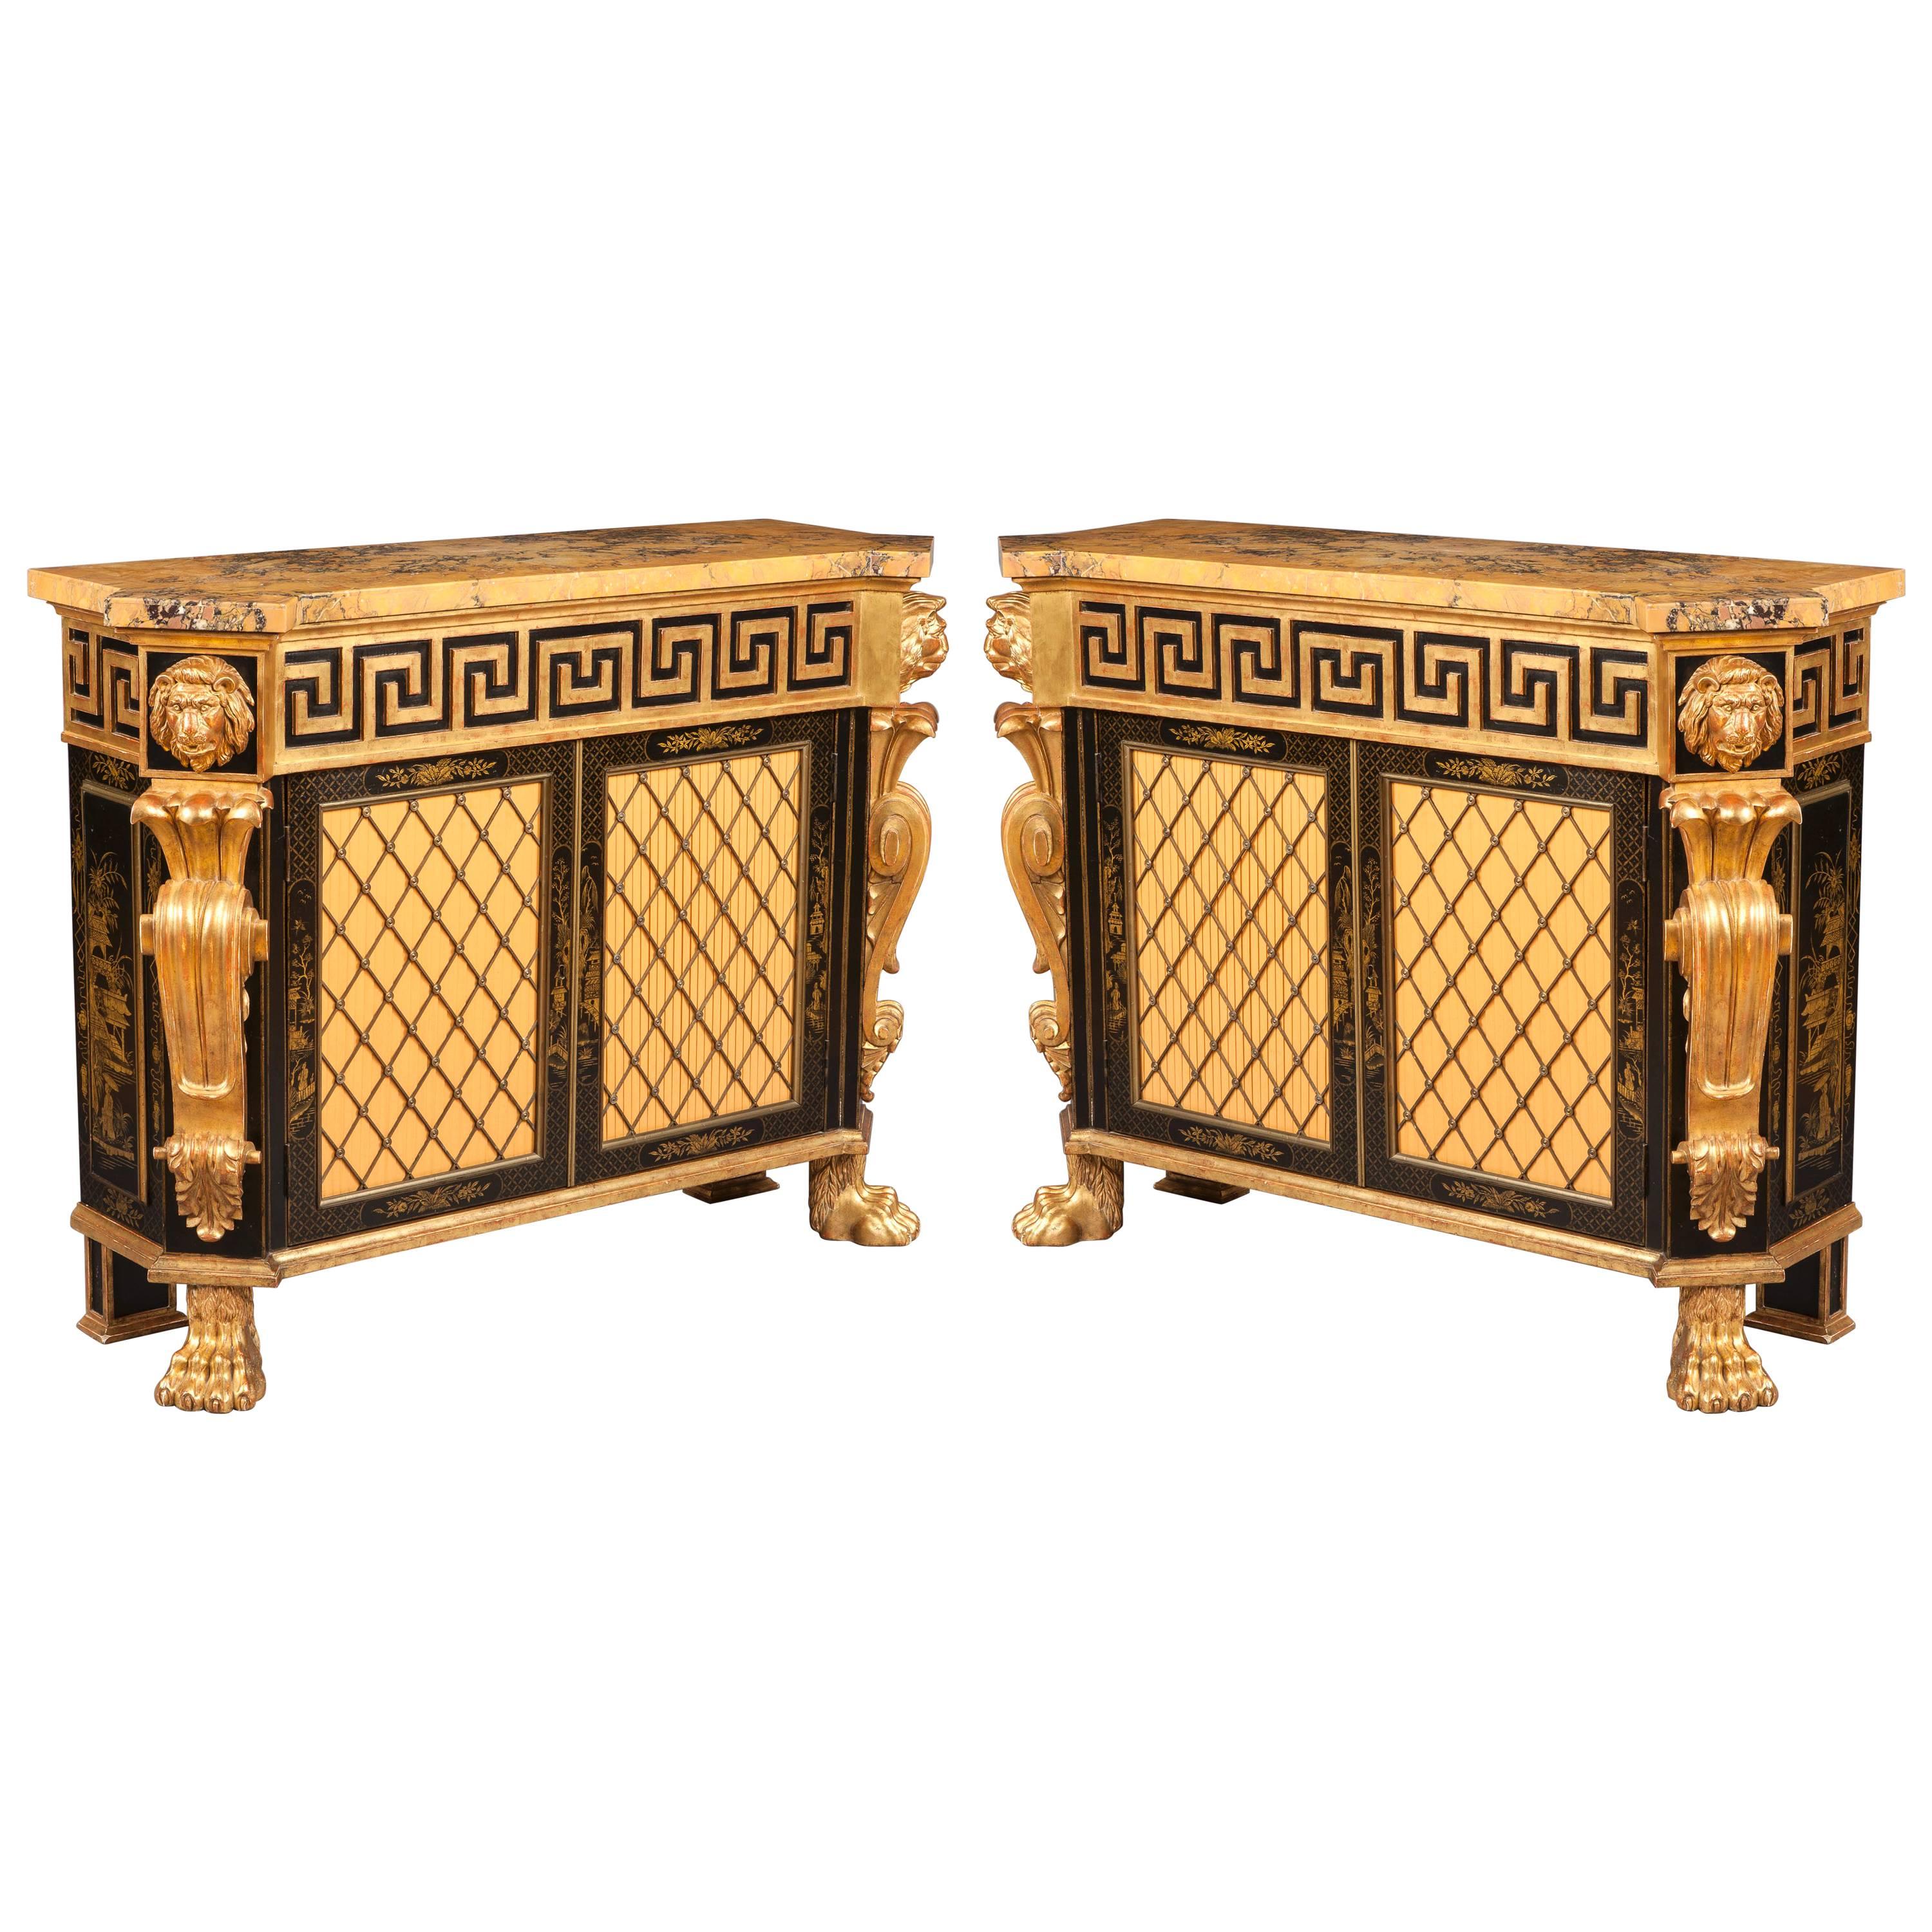 Pair of Highly Decorative Antique Cabinets in the Regency Manner